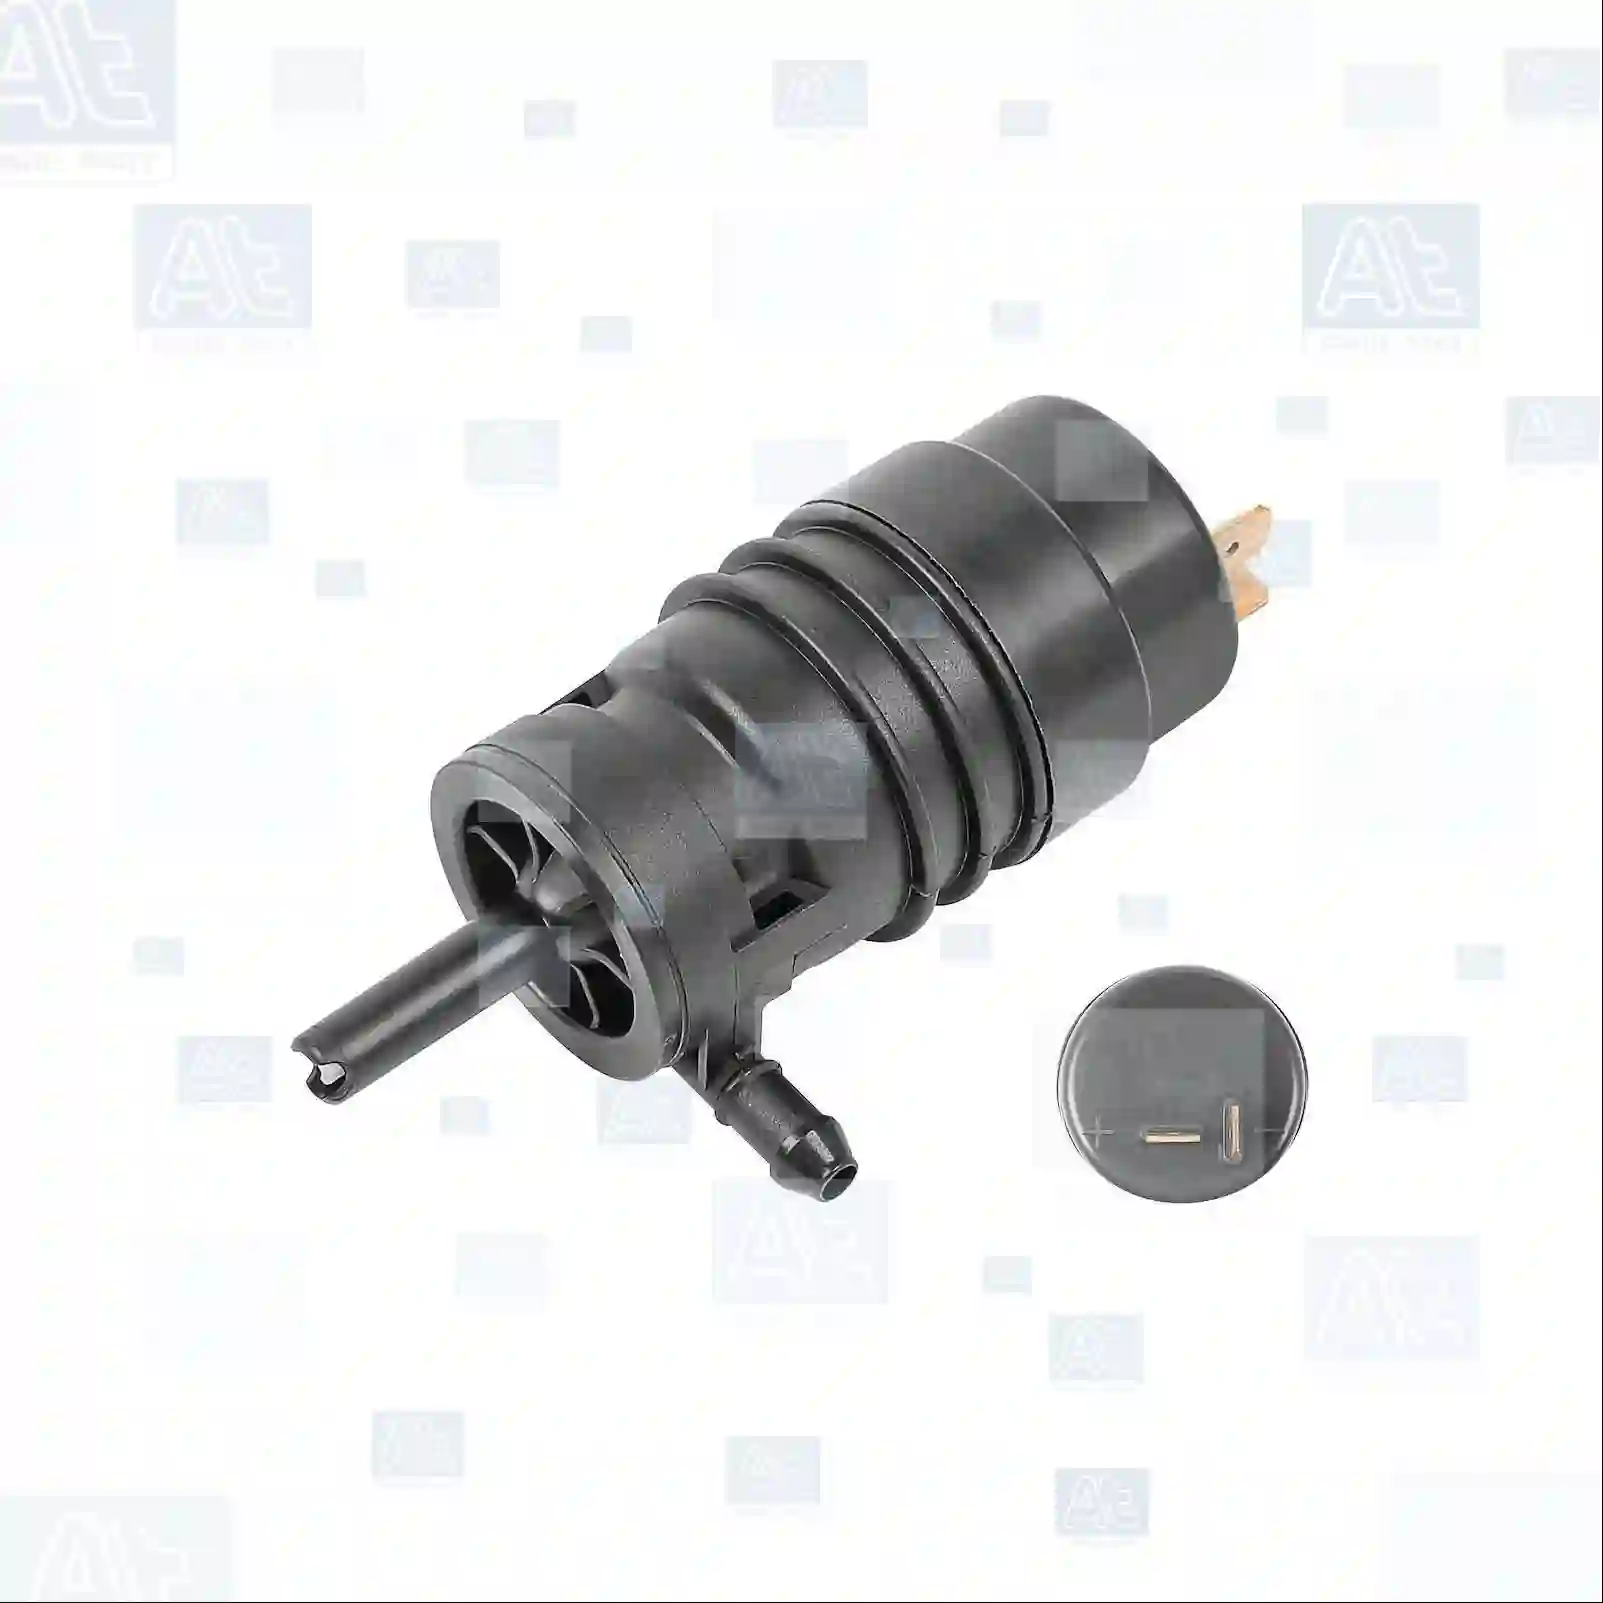 Washer pump, 77718042, 05979027, 07578192, 46443793, 46760972, 60808979, 71730139, 171955651, 2D0955651A, 431955651, 437955651, 861998151B, 00013685853, 1368569, 1368585, 61661358328, 61661360905, 61661367616, 61661368549, 61661368569, 61661368585, 61661368589, 61661370033, 61661370465, 61661380068, 67128360244, 1964696C2, 5103700AA, 5124950AA, 643474, 643484, 0000694910, 01175804, 04376950, 5103700AA, 3582441M10000, G816810190020, V302407000000, 05979027, 07578192, 46443793, 46760972, 5979027, 60808979, 71730139, 7578192, 1958437, 1958438, 90045820, 90492356, 04855729, AL61306, AL79013, 2108520800920, 05979027, 07578192, 46443793, 46760972, 60808979, 71730139, 0008600726, 0008601026, 0008601326, 0008602026, 0008603326, 0008603526, 6388600126, 1450156, 1450174, 1450182, 643474, 643484, 431955651, 92862817200, 8593477, 9506379, 171955651, 1L0955681, 2D0955651A, 431955651, 437955651, 171955651, 2D0955651A, 431955651, 437955651, 5350661245, 11305471, 11883646, 1259832, 171955651, 3205207, 3477646, 171955651, 1L0955681, 2D0955651, 2D0955651A, 431955651, 437955651, 861998151B, KSP955651, ZG21277-0008 ||  77718042 At Spare Part | Engine, Accelerator Pedal, Camshaft, Connecting Rod, Crankcase, Crankshaft, Cylinder Head, Engine Suspension Mountings, Exhaust Manifold, Exhaust Gas Recirculation, Filter Kits, Flywheel Housing, General Overhaul Kits, Engine, Intake Manifold, Oil Cleaner, Oil Cooler, Oil Filter, Oil Pump, Oil Sump, Piston & Liner, Sensor & Switch, Timing Case, Turbocharger, Cooling System, Belt Tensioner, Coolant Filter, Coolant Pipe, Corrosion Prevention Agent, Drive, Expansion Tank, Fan, Intercooler, Monitors & Gauges, Radiator, Thermostat, V-Belt / Timing belt, Water Pump, Fuel System, Electronical Injector Unit, Feed Pump, Fuel Filter, cpl., Fuel Gauge Sender,  Fuel Line, Fuel Pump, Fuel Tank, Injection Line Kit, Injection Pump, Exhaust System, Clutch & Pedal, Gearbox, Propeller Shaft, Axles, Brake System, Hubs & Wheels, Suspension, Leaf Spring, Universal Parts / Accessories, Steering, Electrical System, Cabin Washer pump, 77718042, 05979027, 07578192, 46443793, 46760972, 60808979, 71730139, 171955651, 2D0955651A, 431955651, 437955651, 861998151B, 00013685853, 1368569, 1368585, 61661358328, 61661360905, 61661367616, 61661368549, 61661368569, 61661368585, 61661368589, 61661370033, 61661370465, 61661380068, 67128360244, 1964696C2, 5103700AA, 5124950AA, 643474, 643484, 0000694910, 01175804, 04376950, 5103700AA, 3582441M10000, G816810190020, V302407000000, 05979027, 07578192, 46443793, 46760972, 5979027, 60808979, 71730139, 7578192, 1958437, 1958438, 90045820, 90492356, 04855729, AL61306, AL79013, 2108520800920, 05979027, 07578192, 46443793, 46760972, 60808979, 71730139, 0008600726, 0008601026, 0008601326, 0008602026, 0008603326, 0008603526, 6388600126, 1450156, 1450174, 1450182, 643474, 643484, 431955651, 92862817200, 8593477, 9506379, 171955651, 1L0955681, 2D0955651A, 431955651, 437955651, 171955651, 2D0955651A, 431955651, 437955651, 5350661245, 11305471, 11883646, 1259832, 171955651, 3205207, 3477646, 171955651, 1L0955681, 2D0955651, 2D0955651A, 431955651, 437955651, 861998151B, KSP955651, ZG21277-0008 ||  77718042 At Spare Part | Engine, Accelerator Pedal, Camshaft, Connecting Rod, Crankcase, Crankshaft, Cylinder Head, Engine Suspension Mountings, Exhaust Manifold, Exhaust Gas Recirculation, Filter Kits, Flywheel Housing, General Overhaul Kits, Engine, Intake Manifold, Oil Cleaner, Oil Cooler, Oil Filter, Oil Pump, Oil Sump, Piston & Liner, Sensor & Switch, Timing Case, Turbocharger, Cooling System, Belt Tensioner, Coolant Filter, Coolant Pipe, Corrosion Prevention Agent, Drive, Expansion Tank, Fan, Intercooler, Monitors & Gauges, Radiator, Thermostat, V-Belt / Timing belt, Water Pump, Fuel System, Electronical Injector Unit, Feed Pump, Fuel Filter, cpl., Fuel Gauge Sender,  Fuel Line, Fuel Pump, Fuel Tank, Injection Line Kit, Injection Pump, Exhaust System, Clutch & Pedal, Gearbox, Propeller Shaft, Axles, Brake System, Hubs & Wheels, Suspension, Leaf Spring, Universal Parts / Accessories, Steering, Electrical System, Cabin